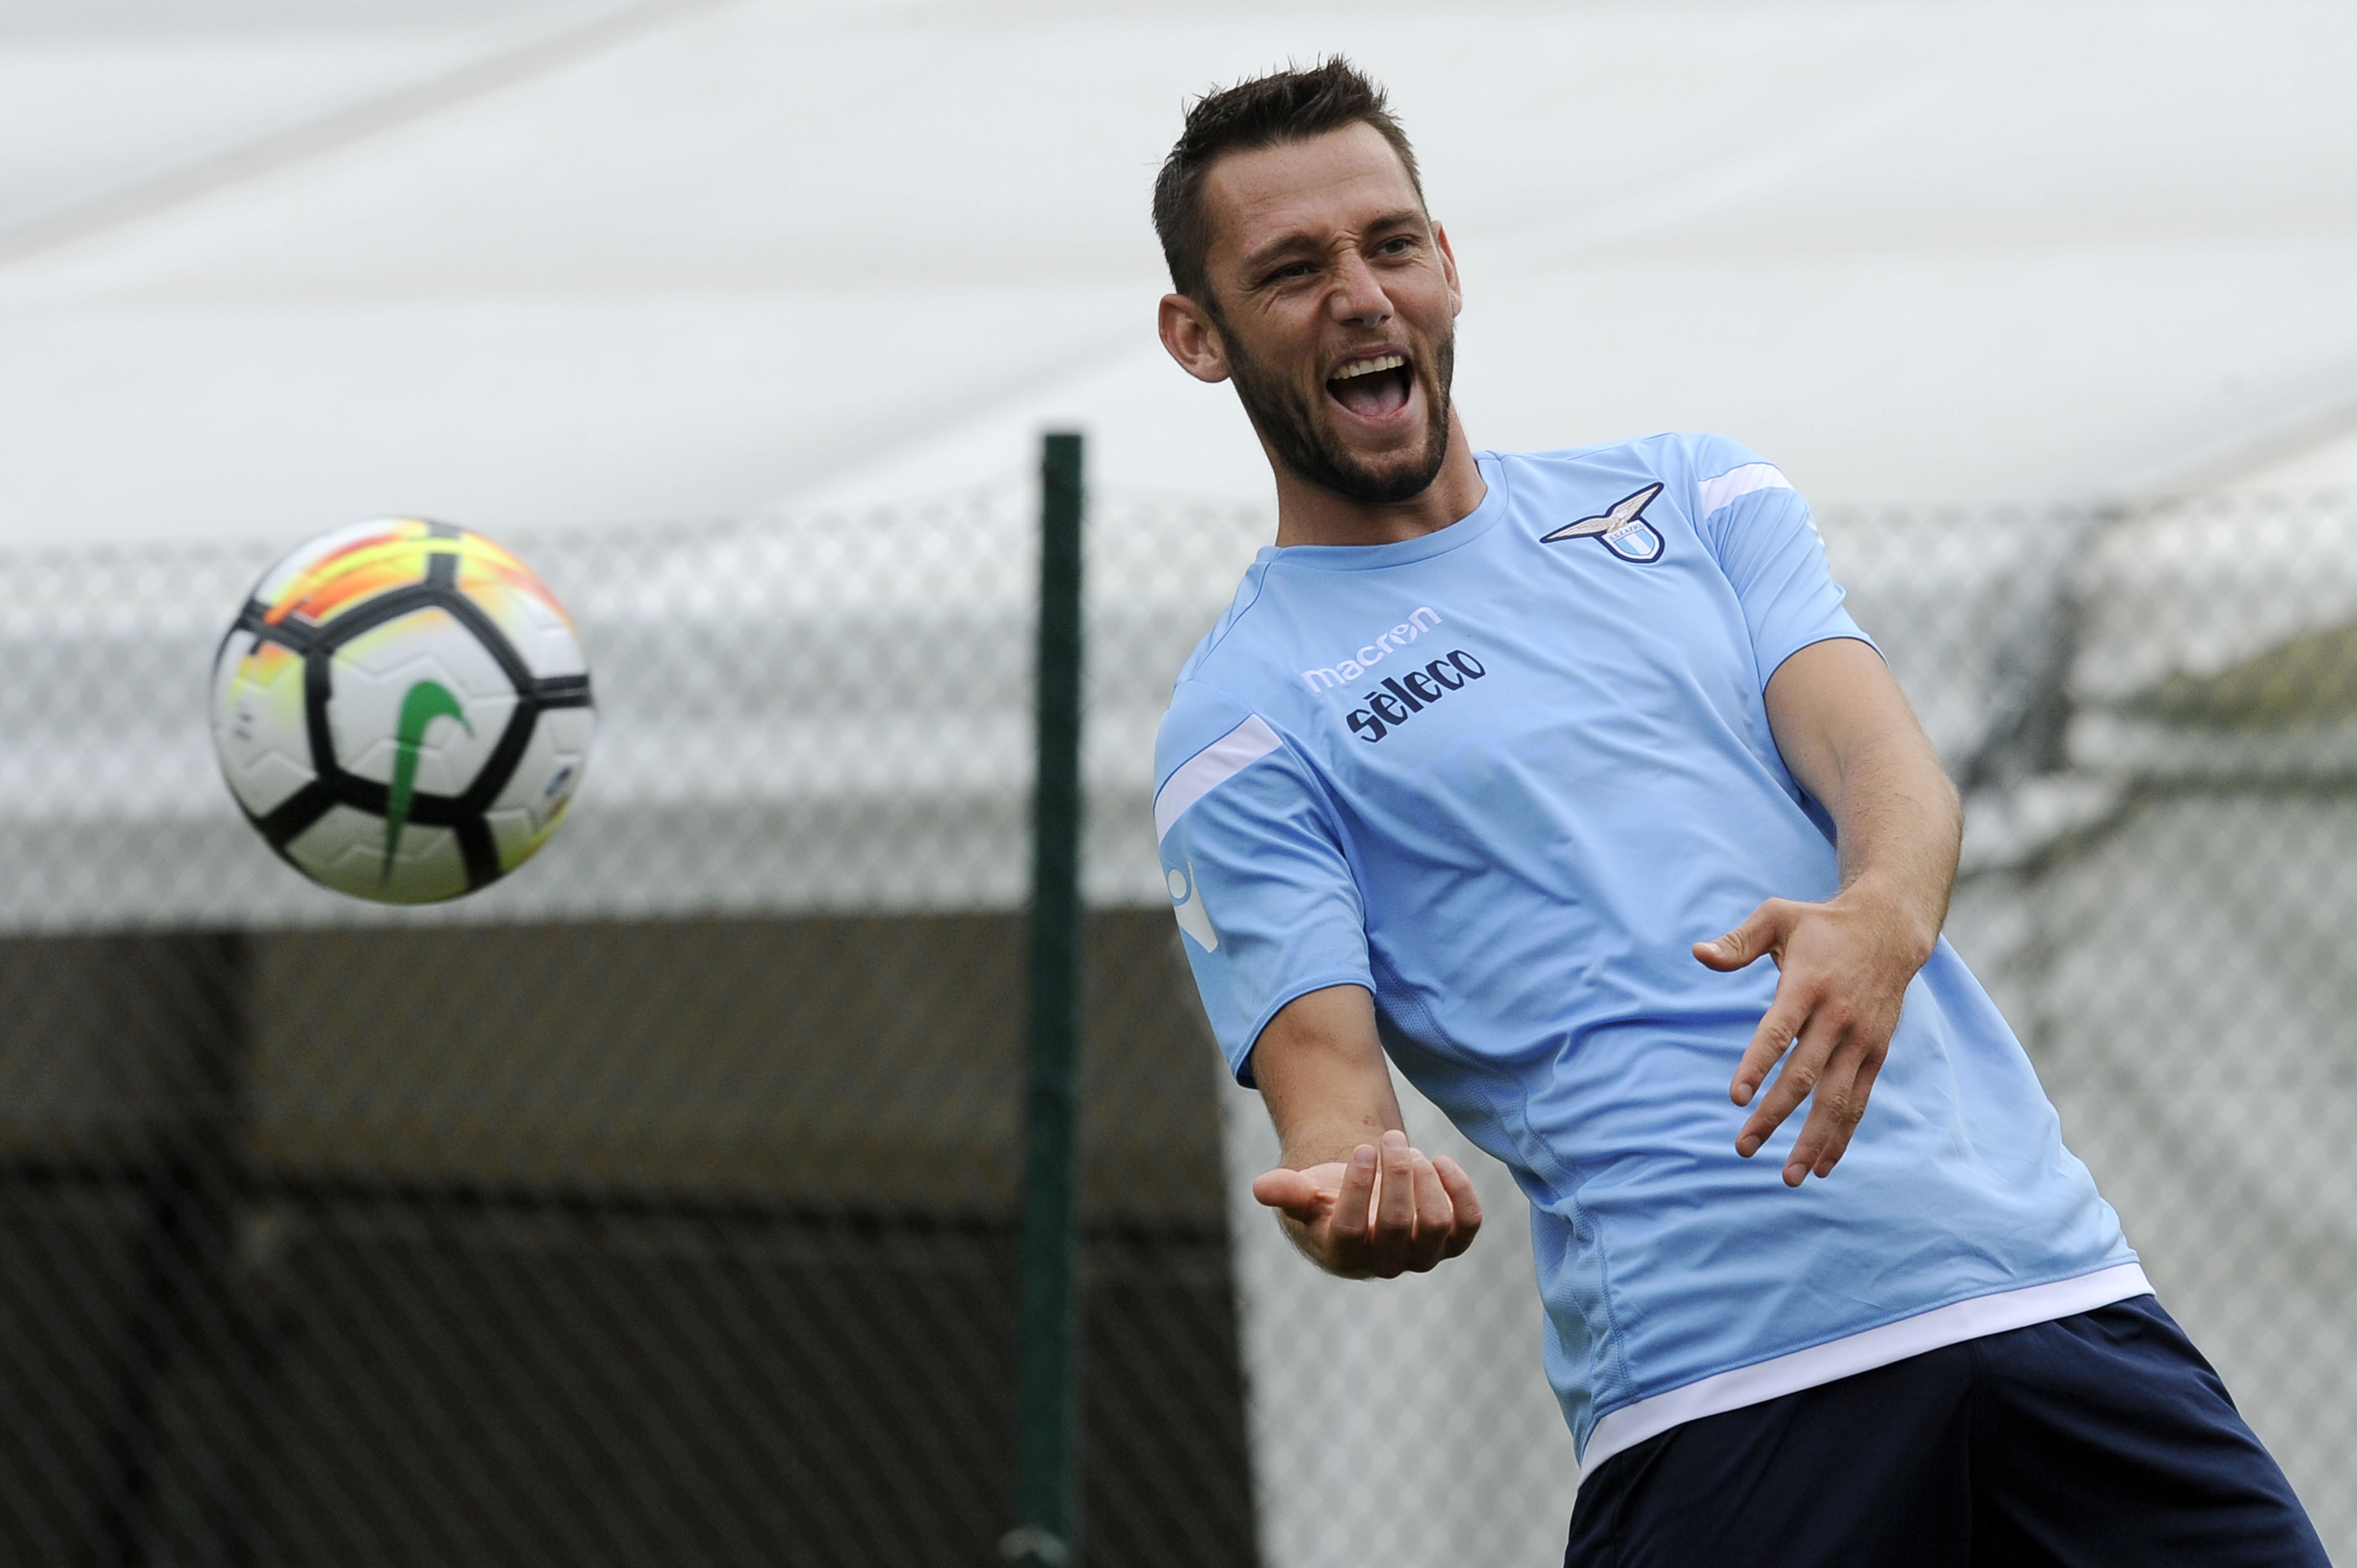 PIEVE DI CADORE, ROMA - JULY 11:  Stefan De Vrij during the SS Lazio traning Camp - Day 3 on July 11, 2017 in Pieve di Cadore, Italy.  (Photo by Marco Rosi/Getty Images)